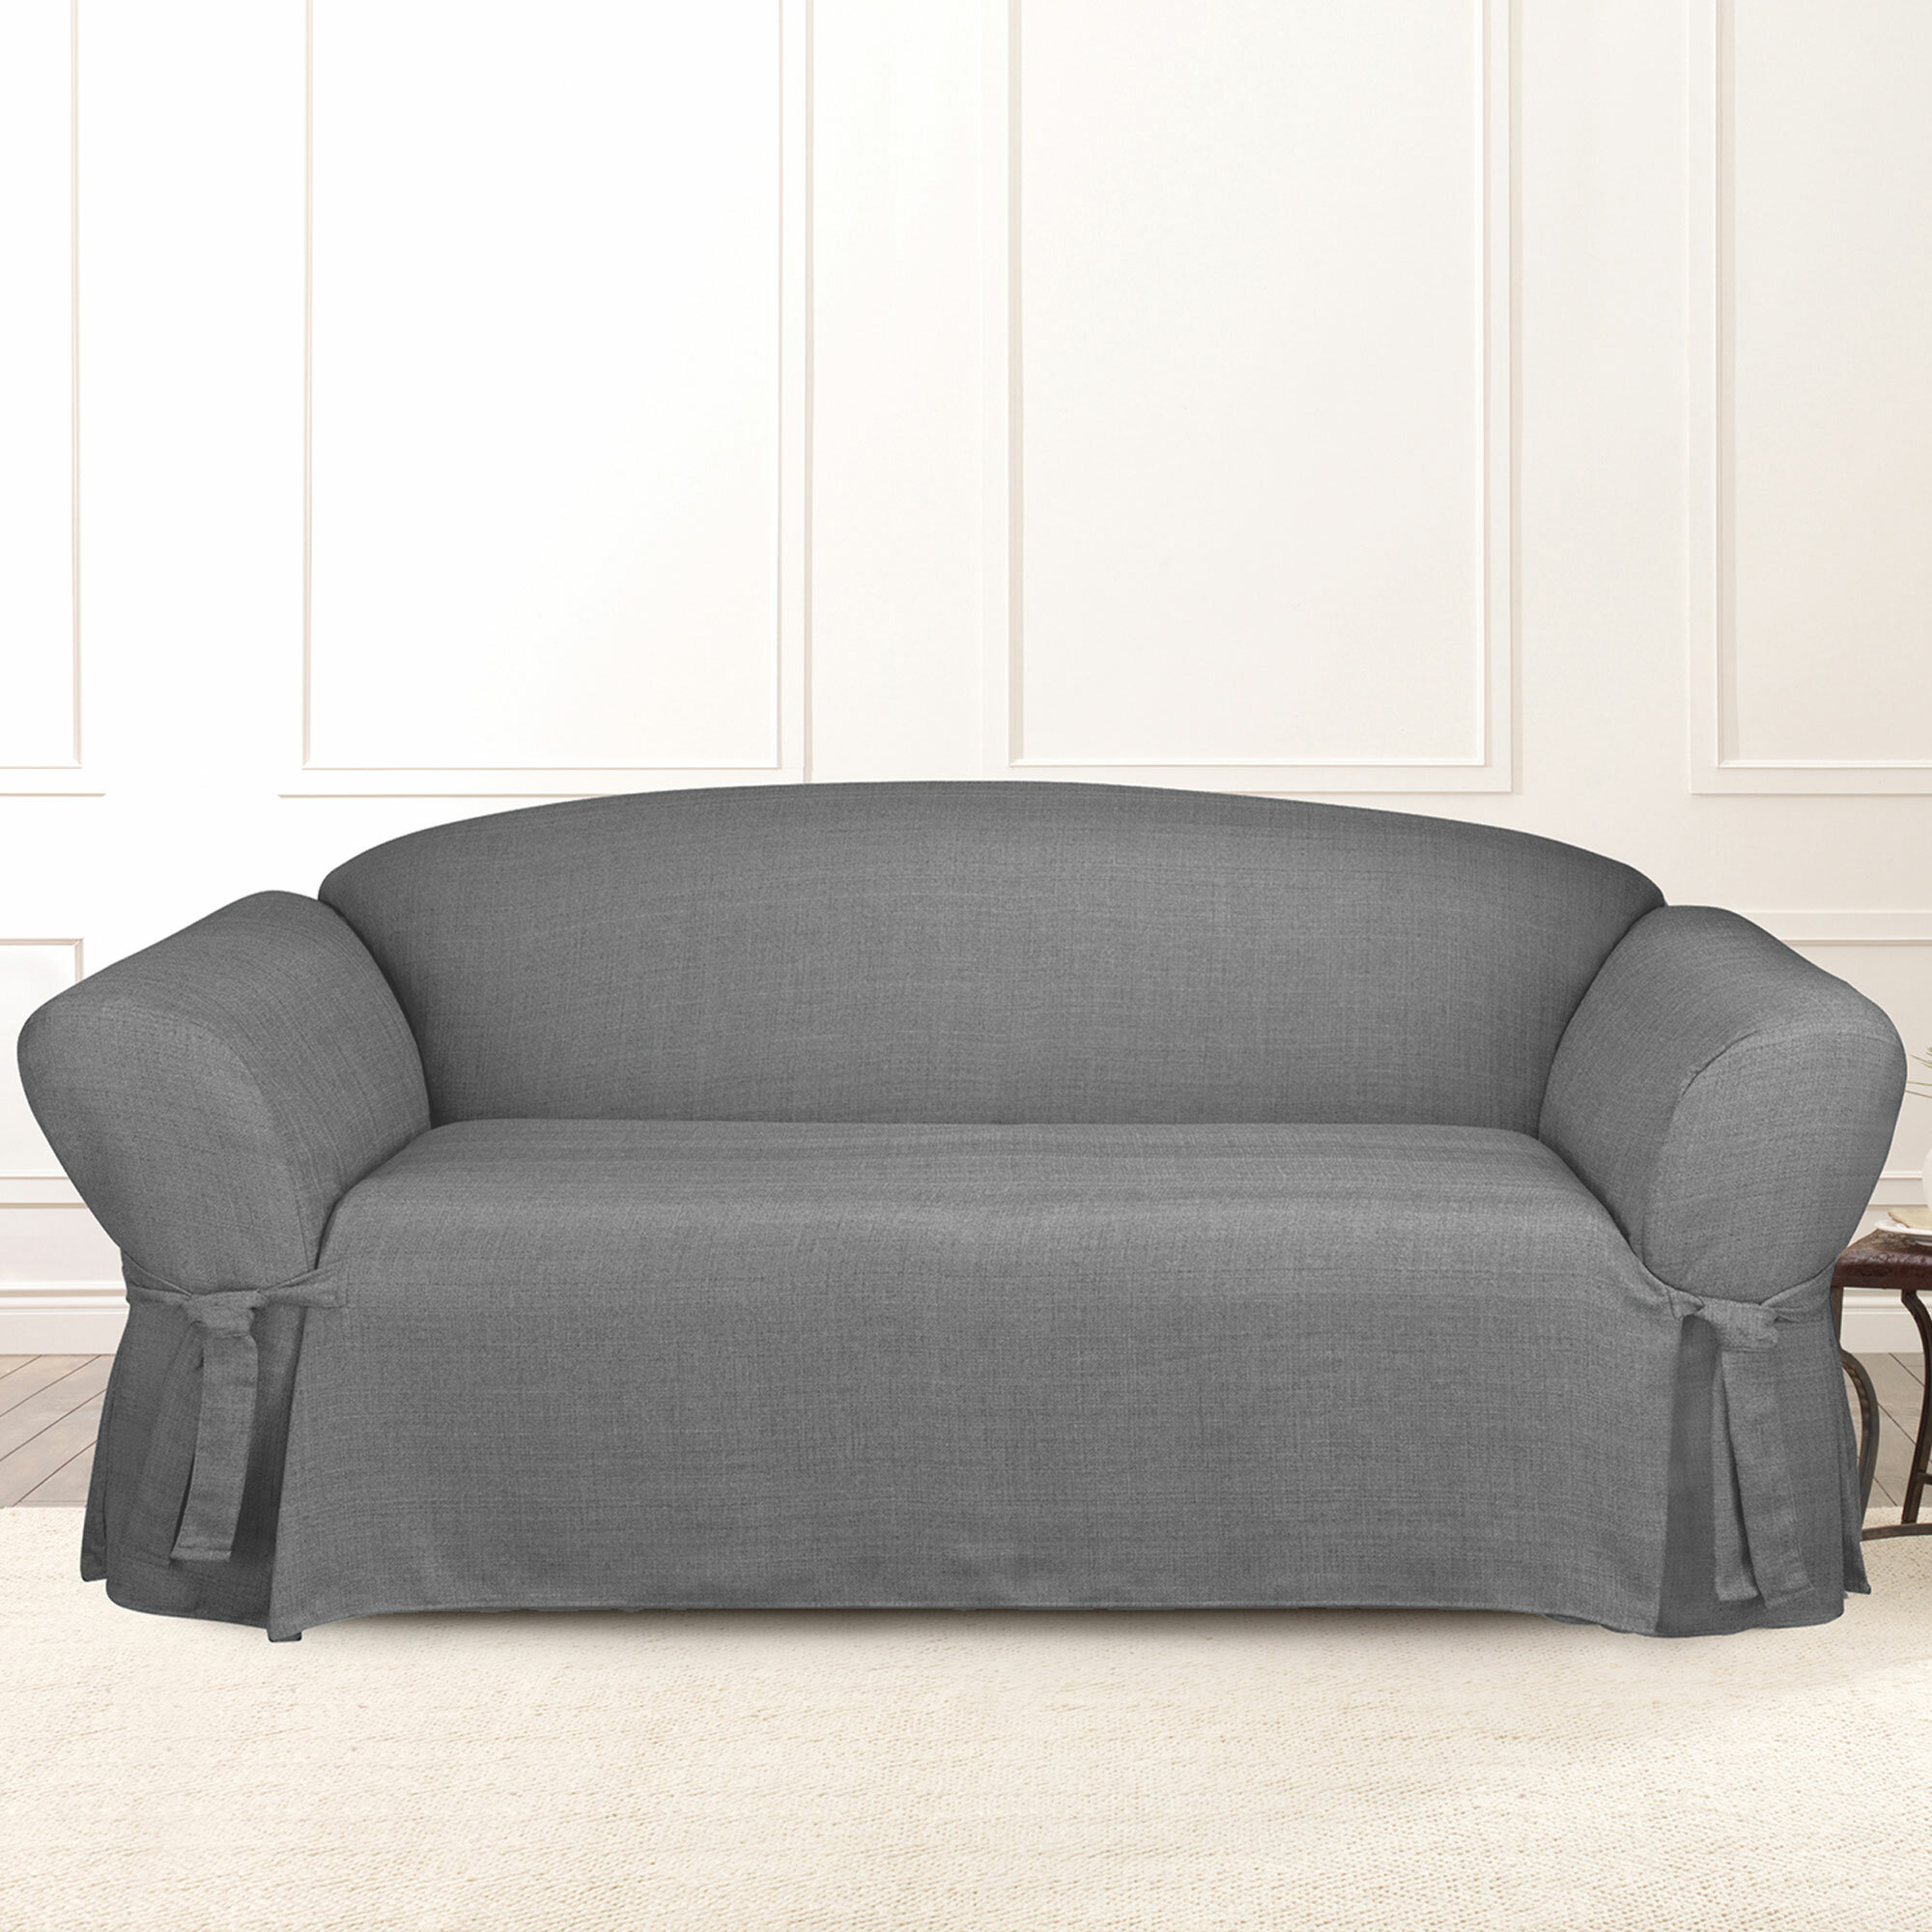 Fancy Linen Sure Fit Stretch Sterling Slipcover Set Slipcover Solid New Dark Grey//Charcoal, Sofa